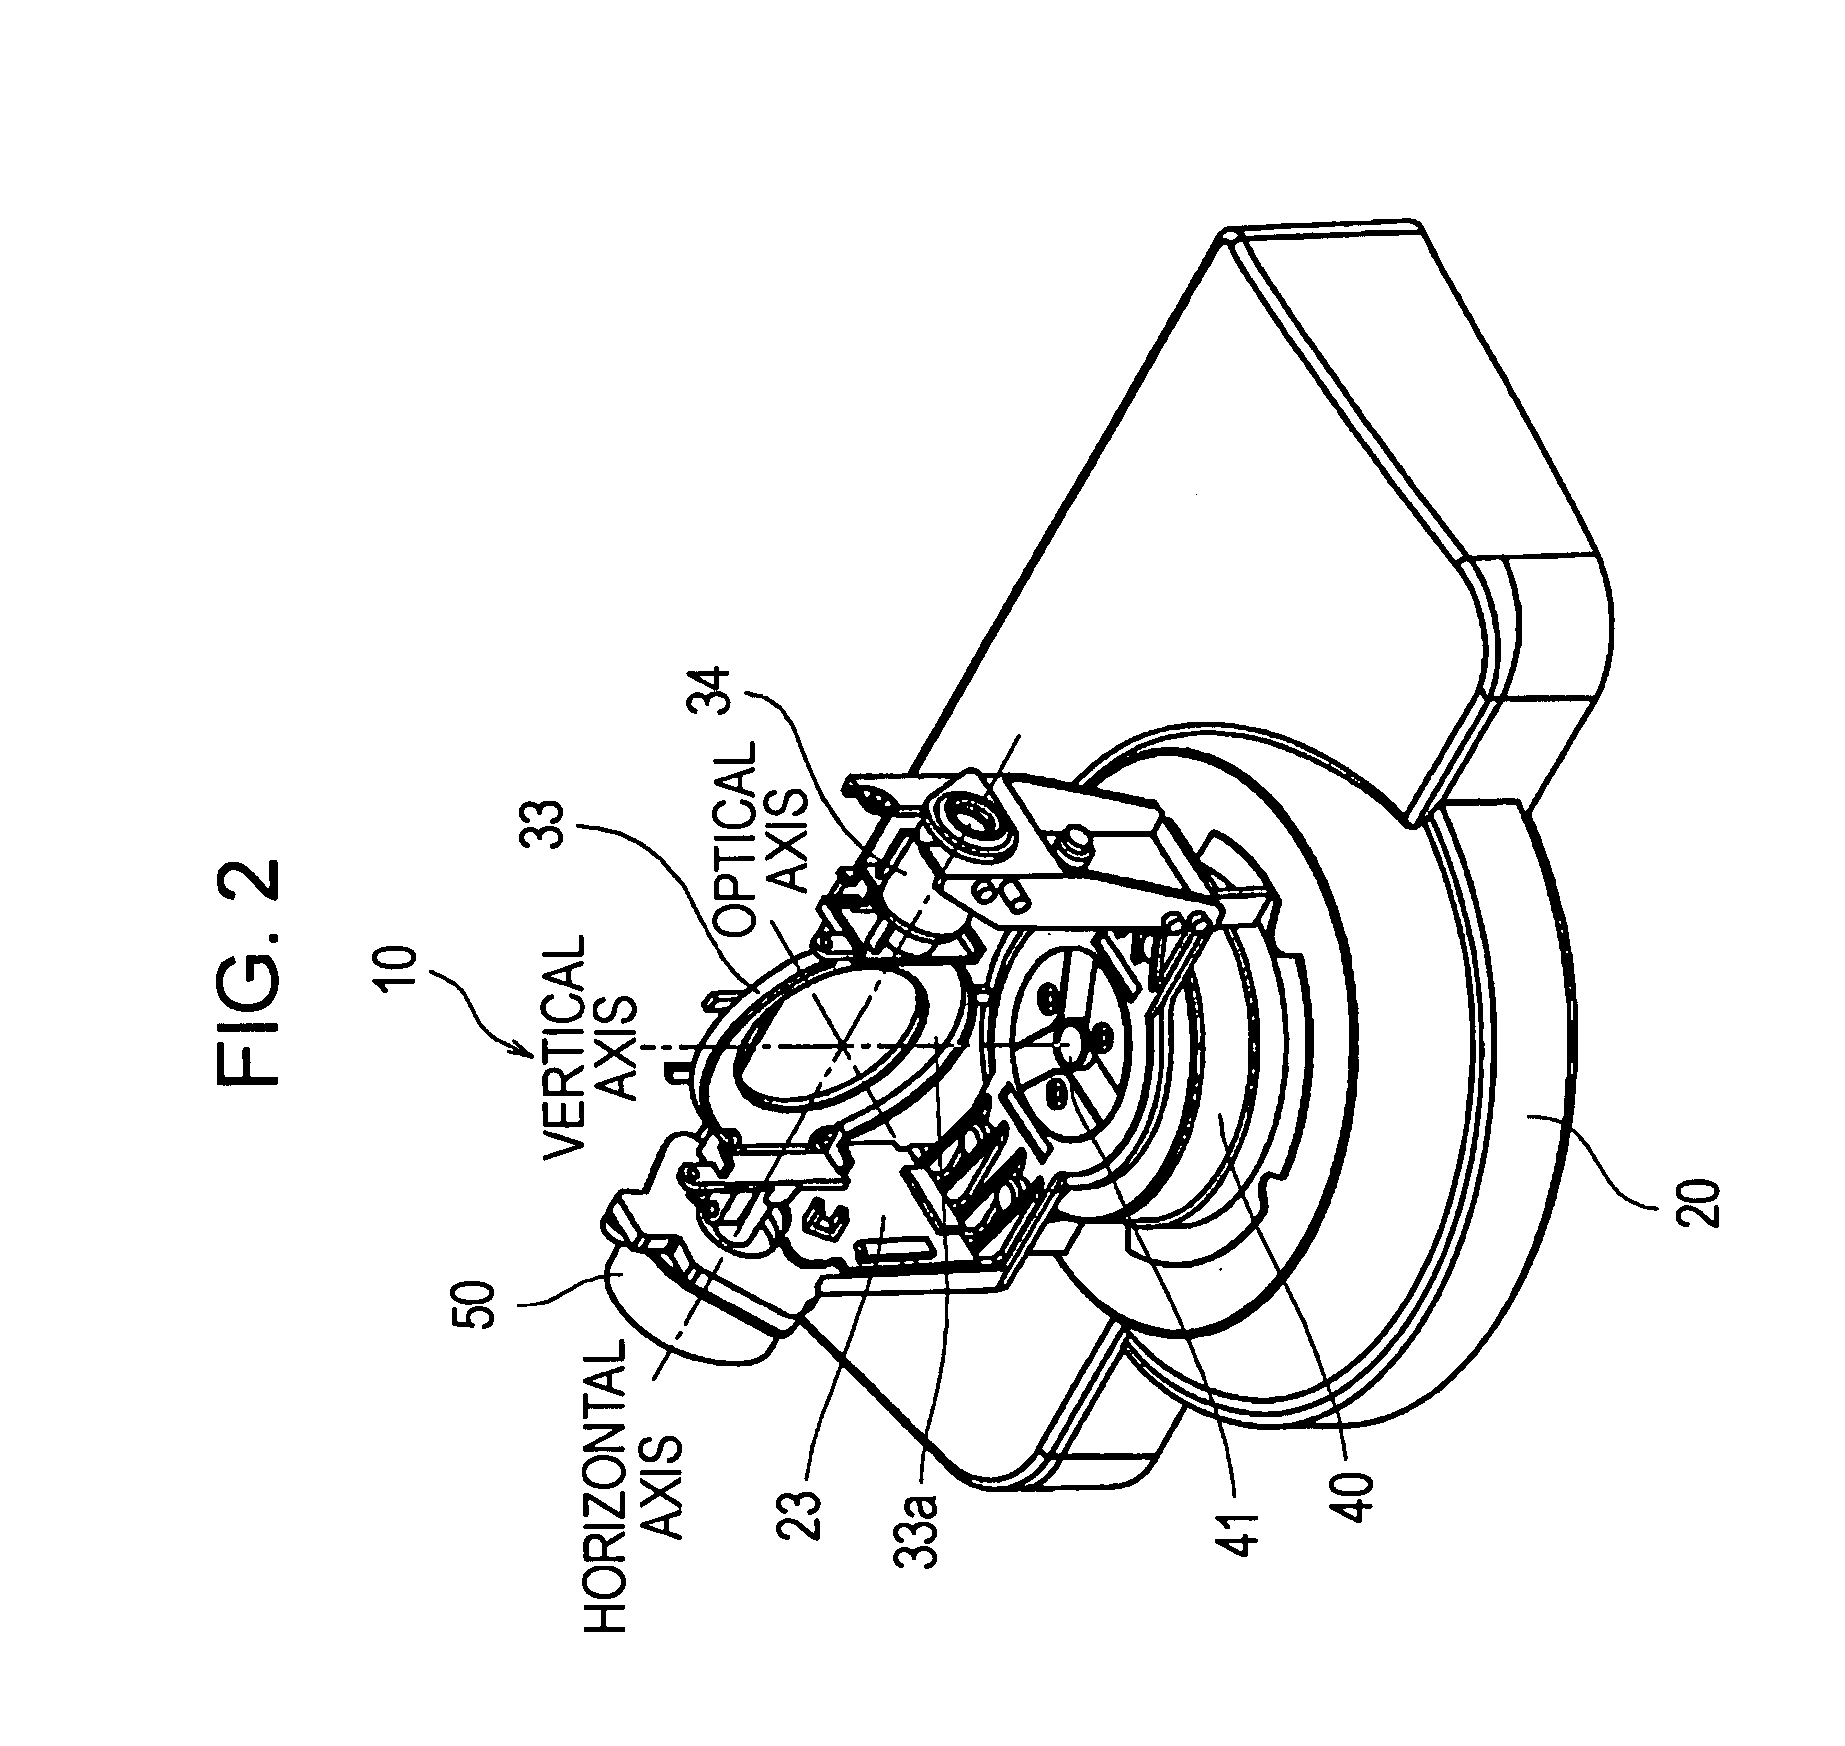 Image pickup apparatus with rotary lens barrel